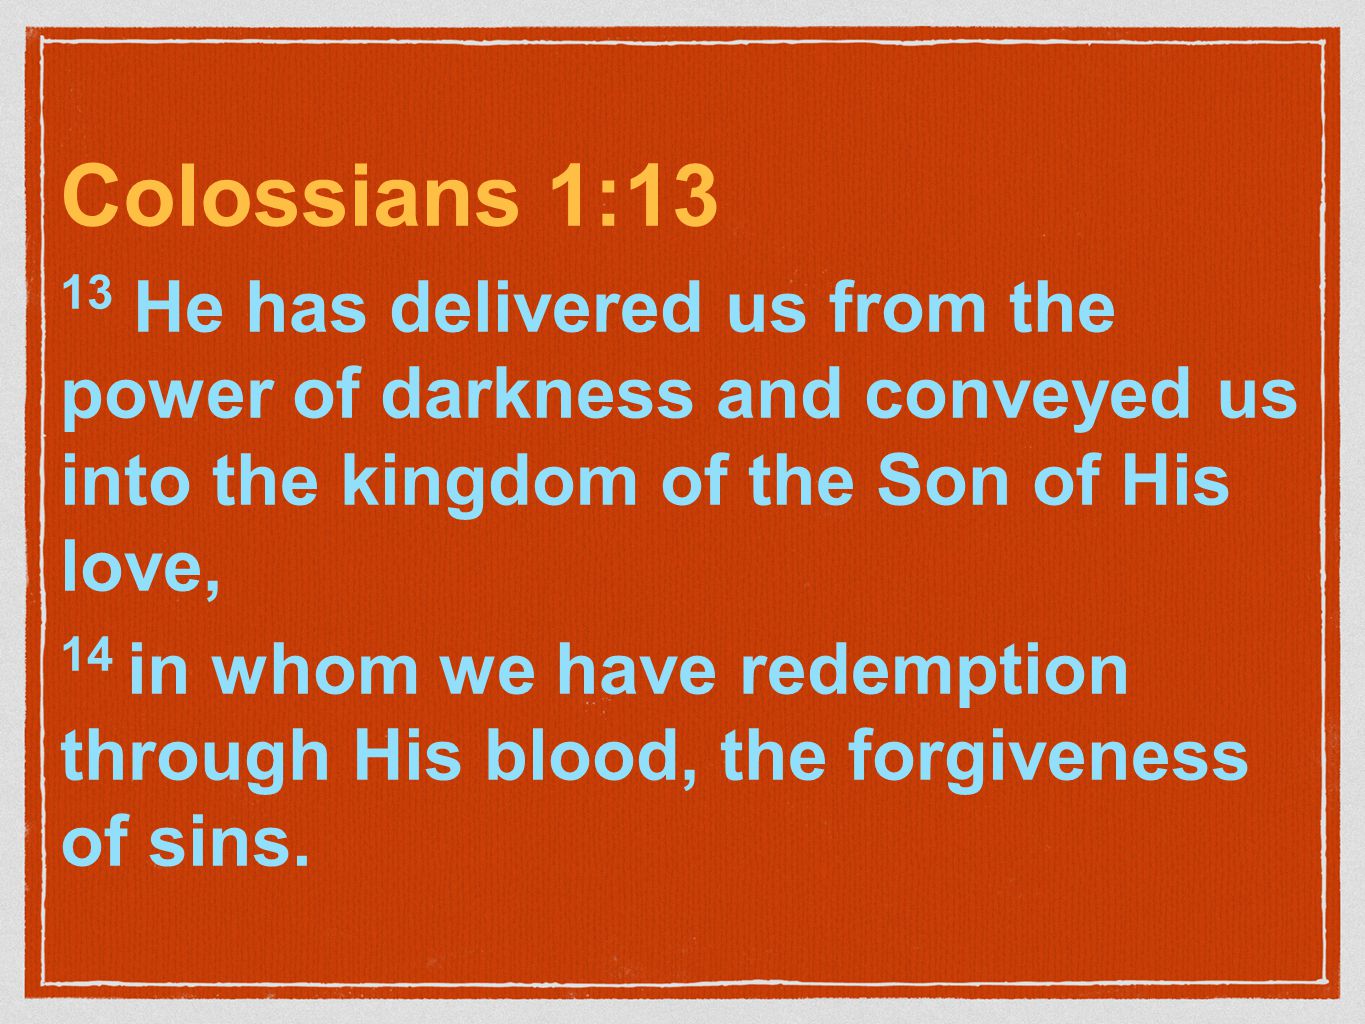 Colossians 1:13 13 He has delivered us from the power of darkness and conveyed us into the kingdom of the Son of His love, 14 in whom we have redemption through His blood, the forgiveness of sins.